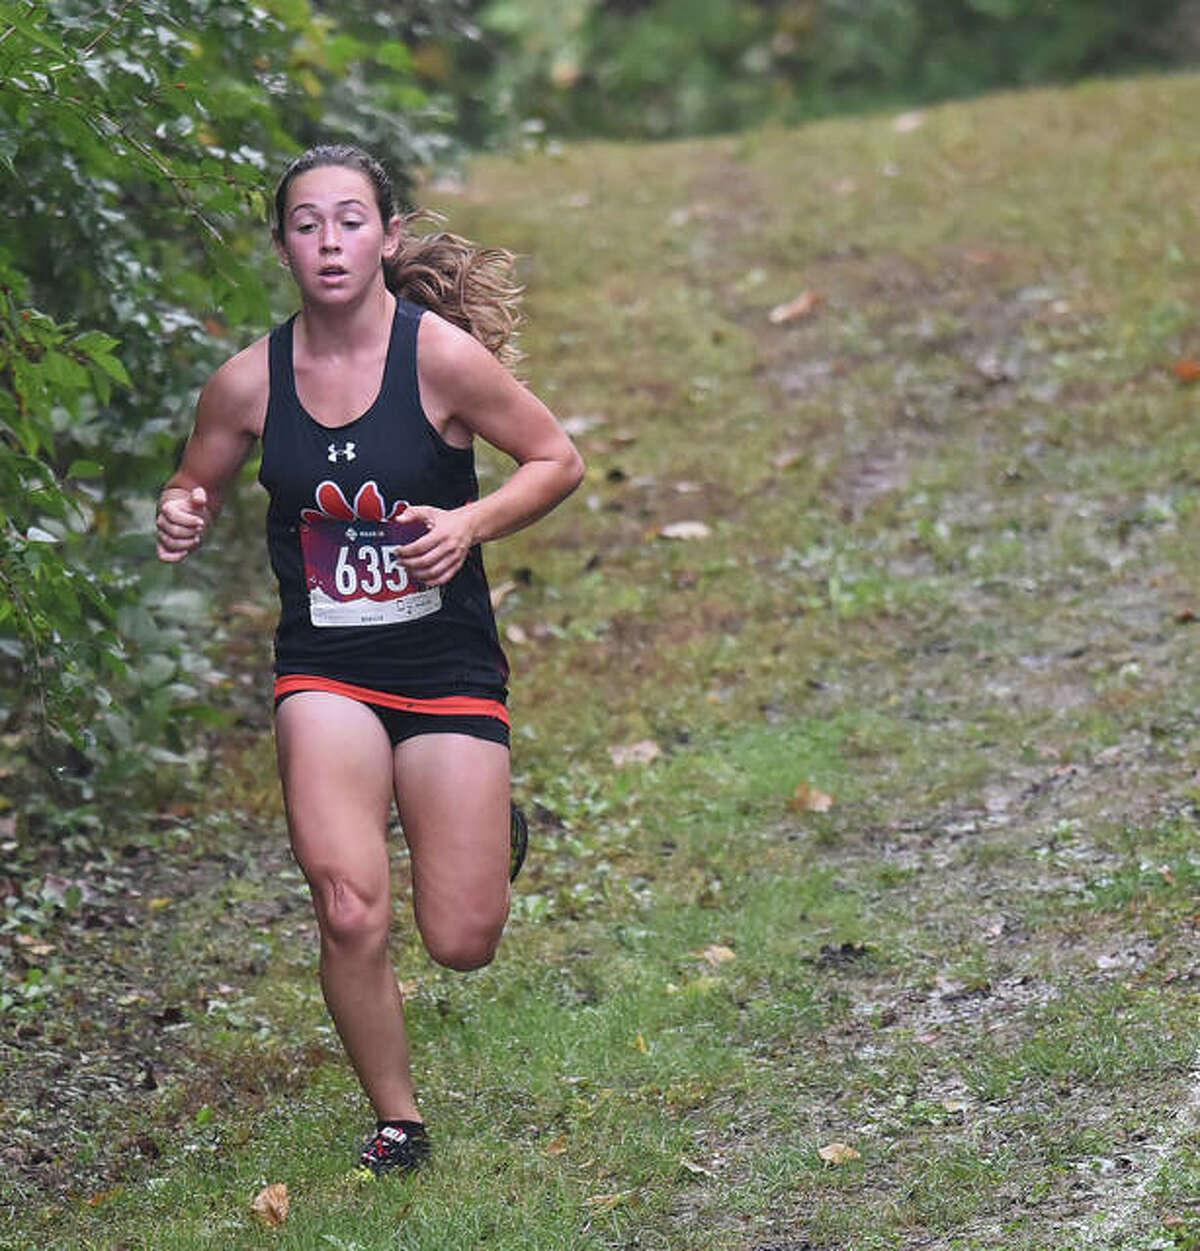 Edwardsville’s Olivia Coll, left, runs down a hill during the Southwestern Conference Meet.